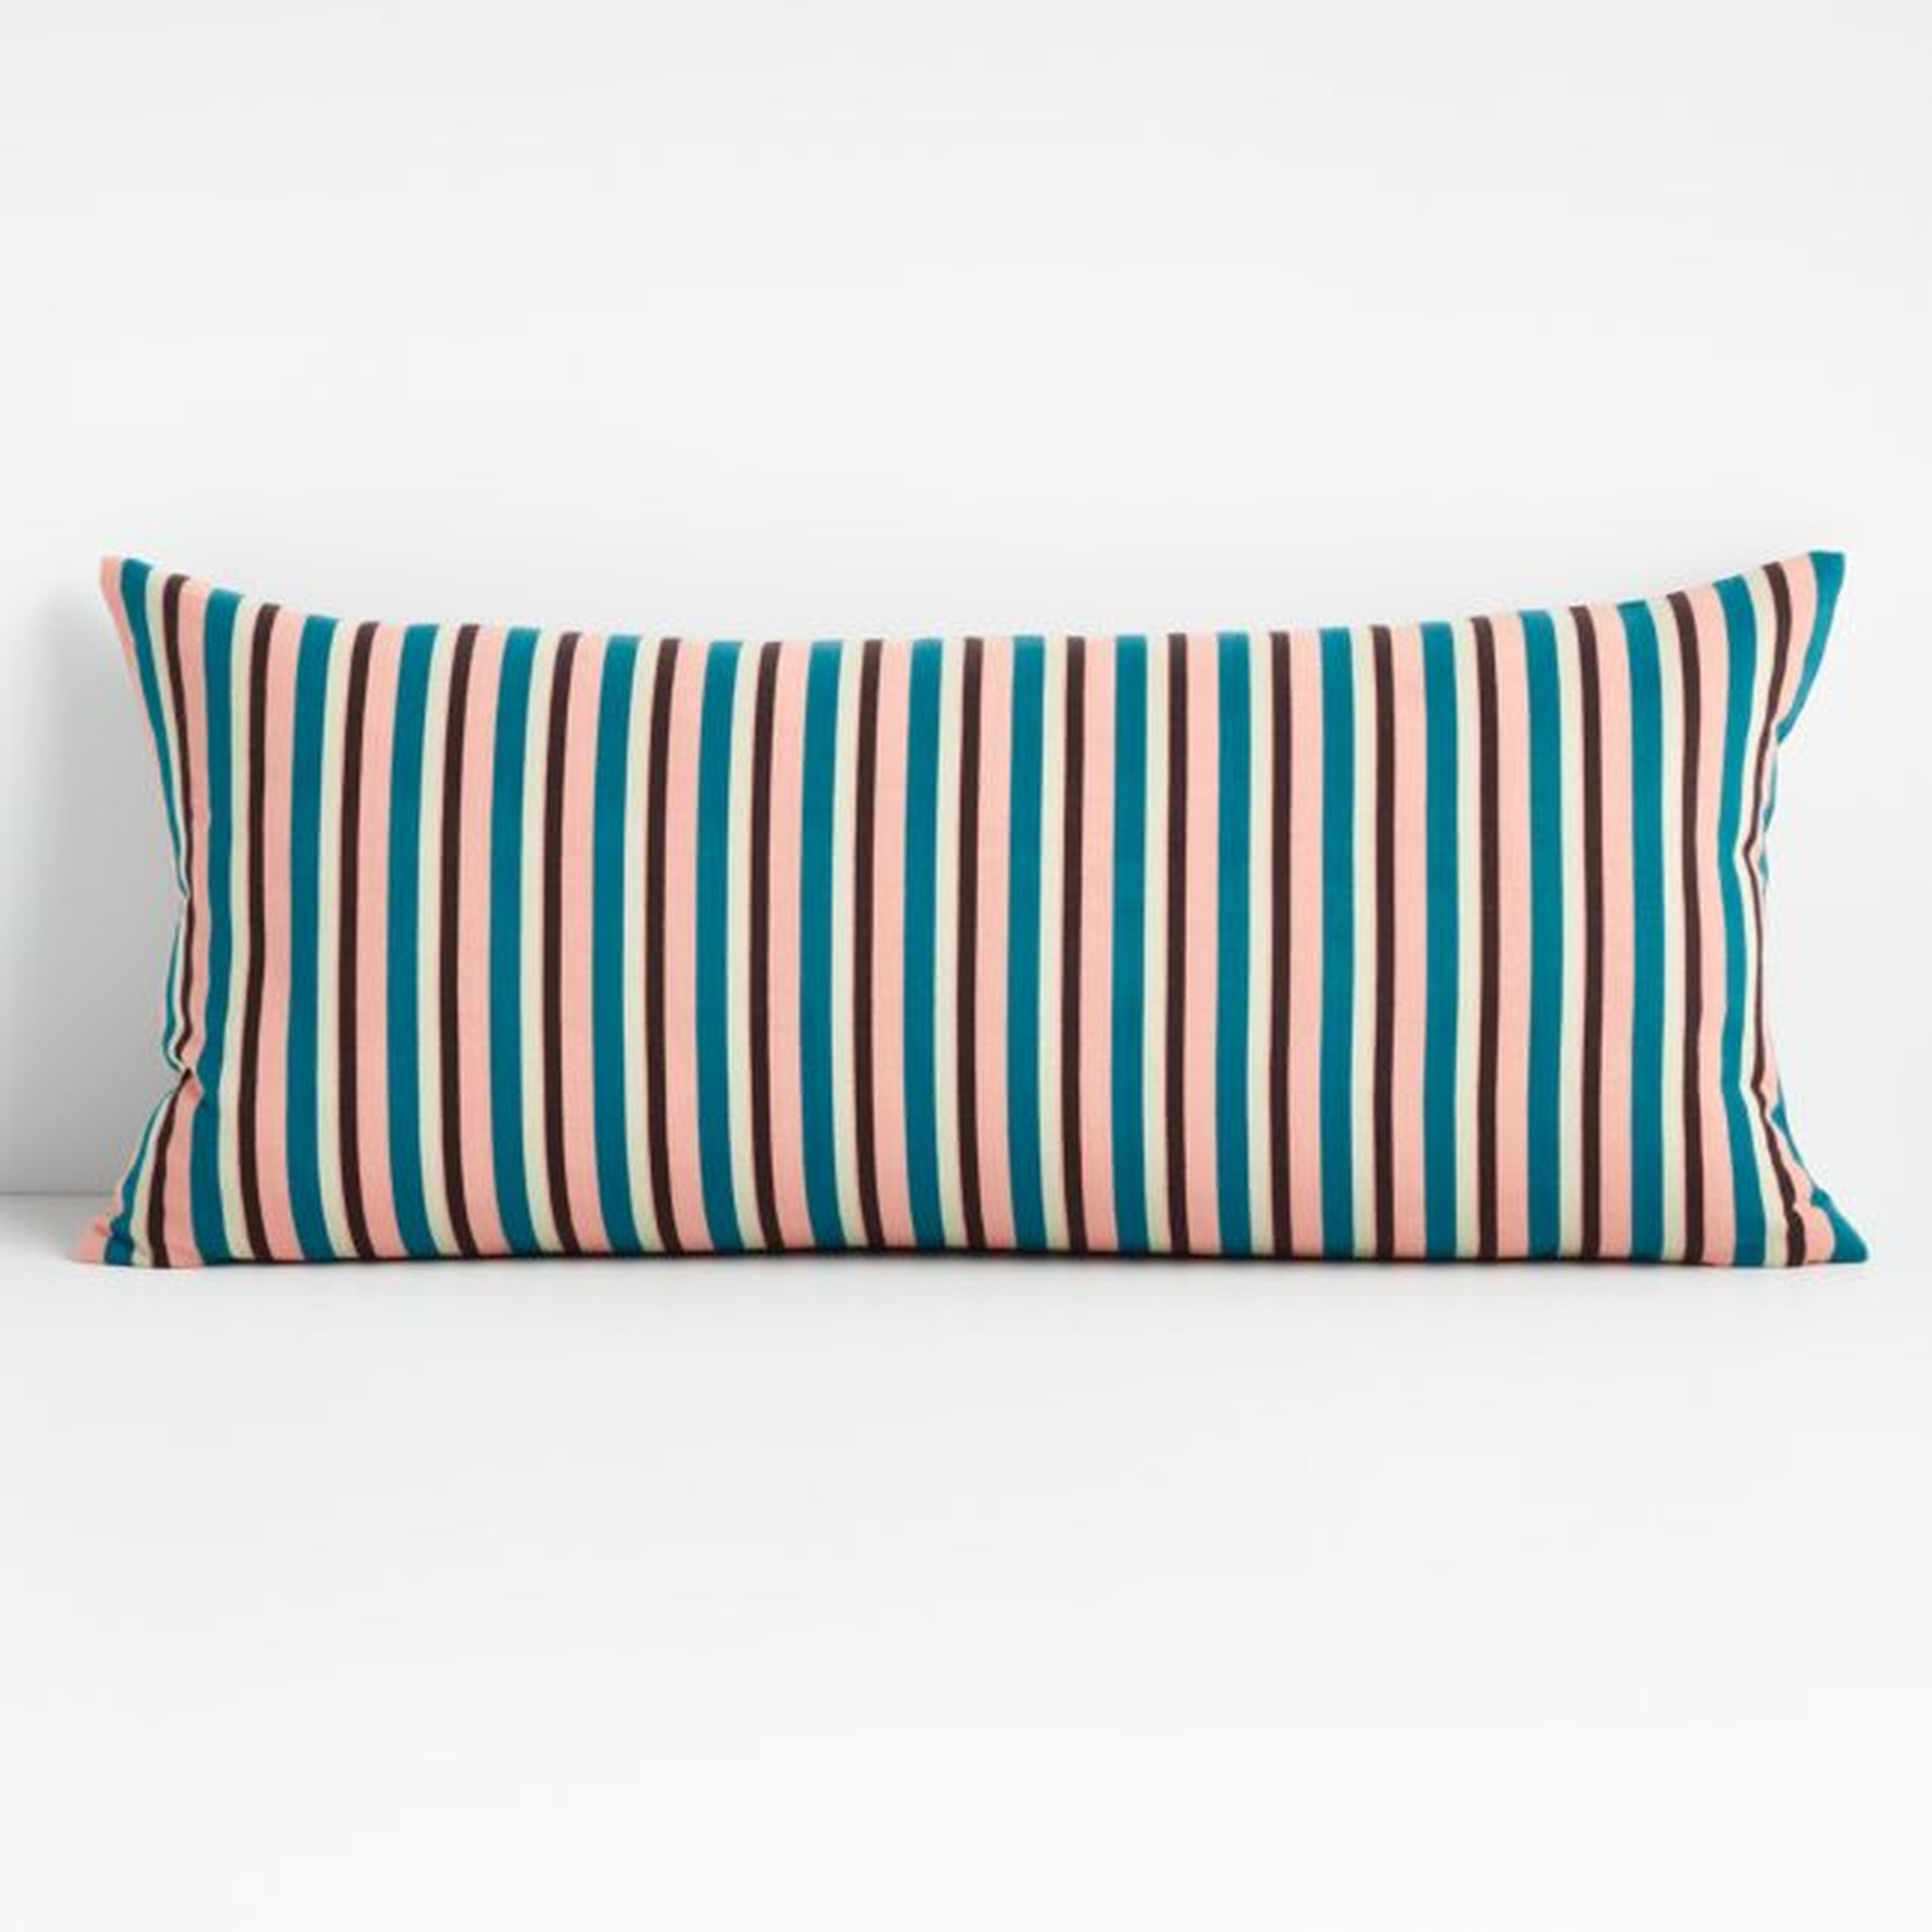 Moreau Teal 36"x16" Striped Pillow with Feather-Down Insert - Crate and Barrel